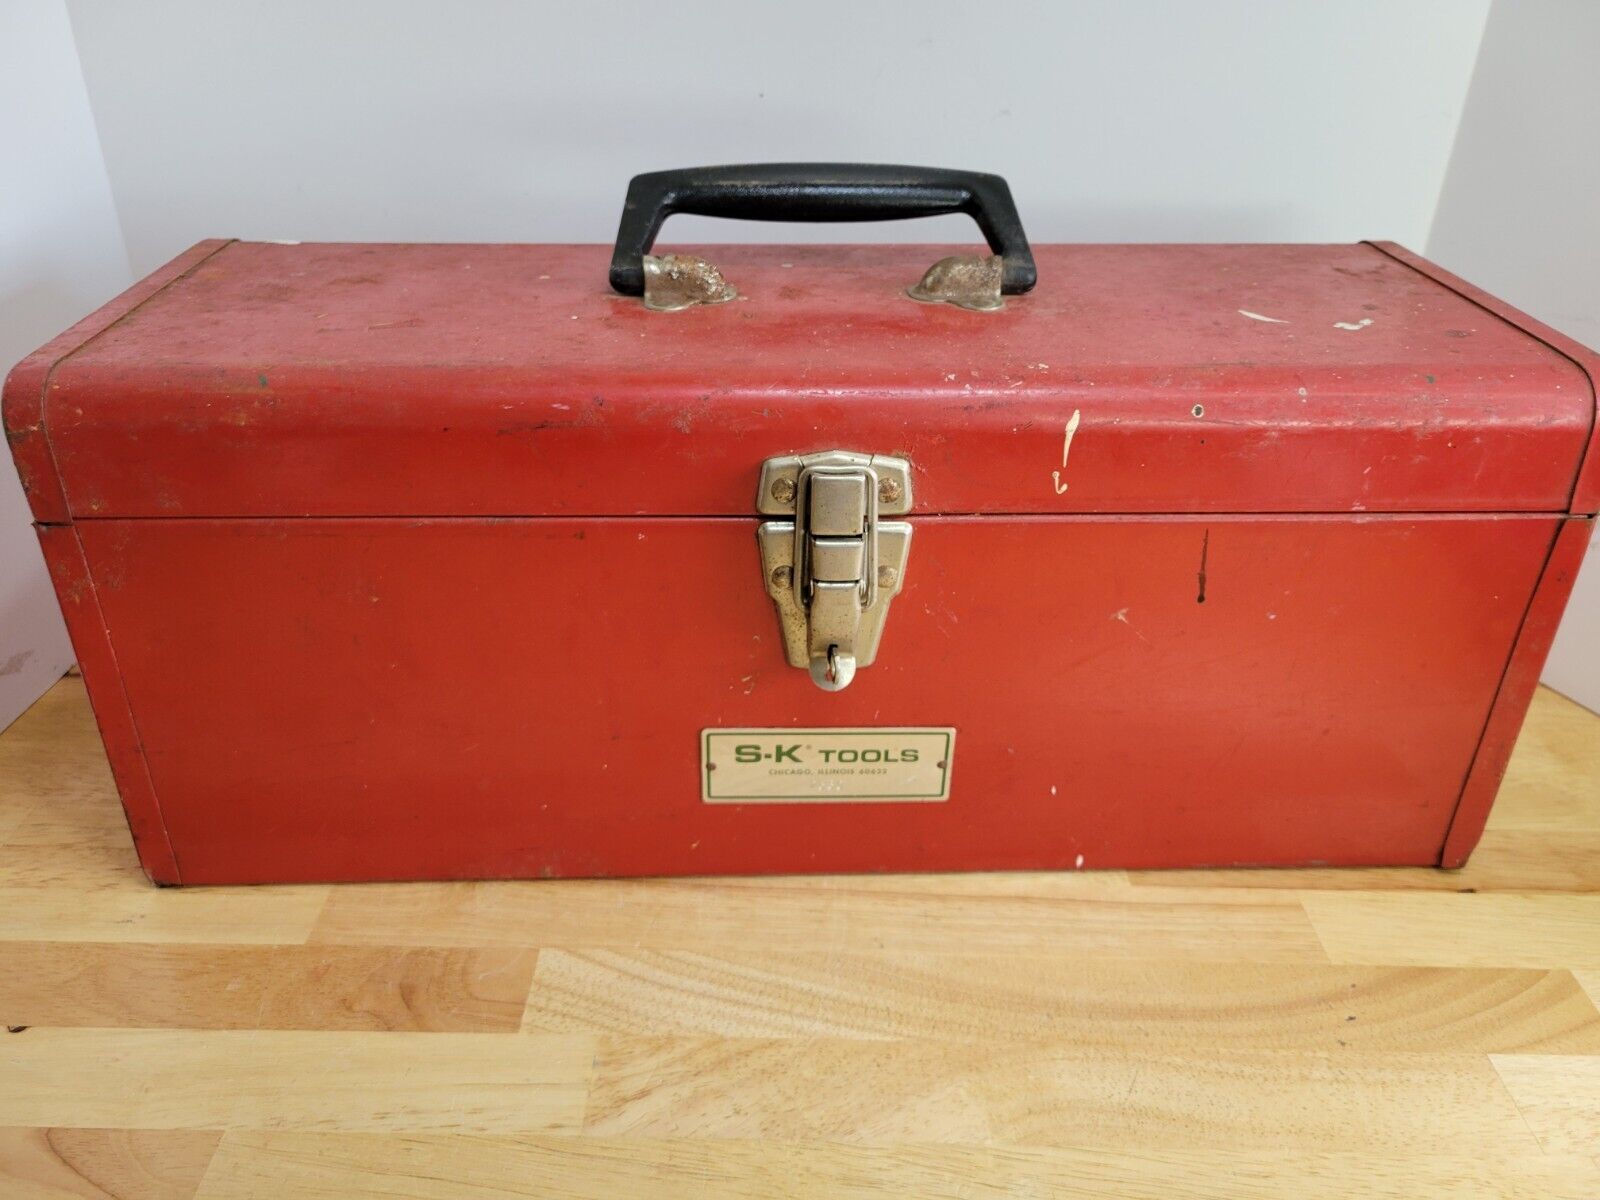 Vintage S-K Tools Toolbox Red Portable with insert 19